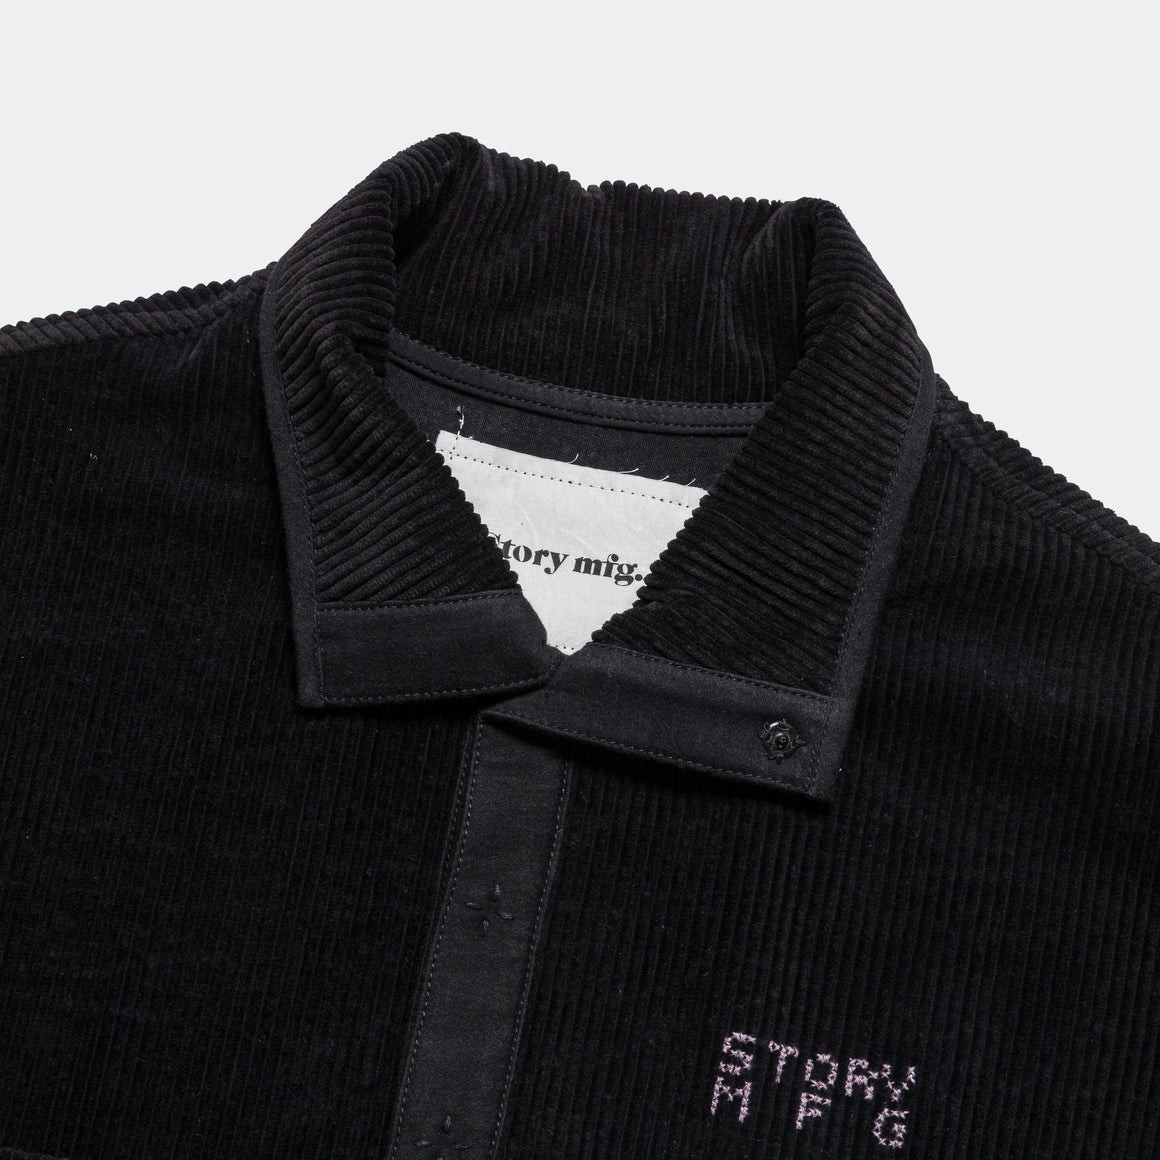 Story mfg. - Polite Pullover - Black Corduroy - UP THERE